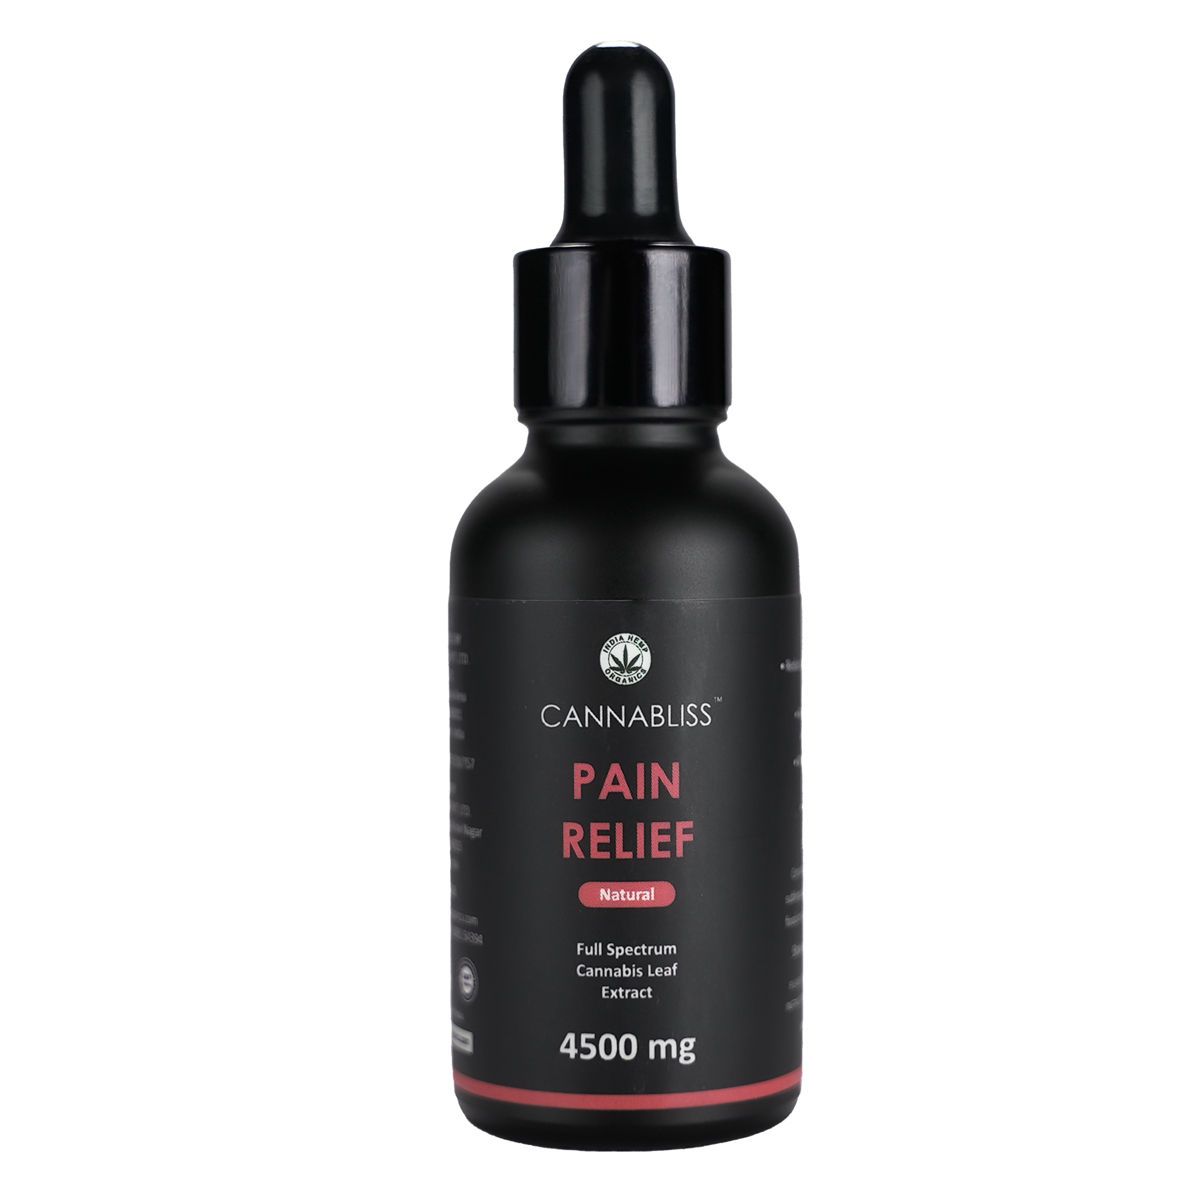 Buy Cannabliss Pain Relief Natural 4500 mg Oil, 30 ml Online